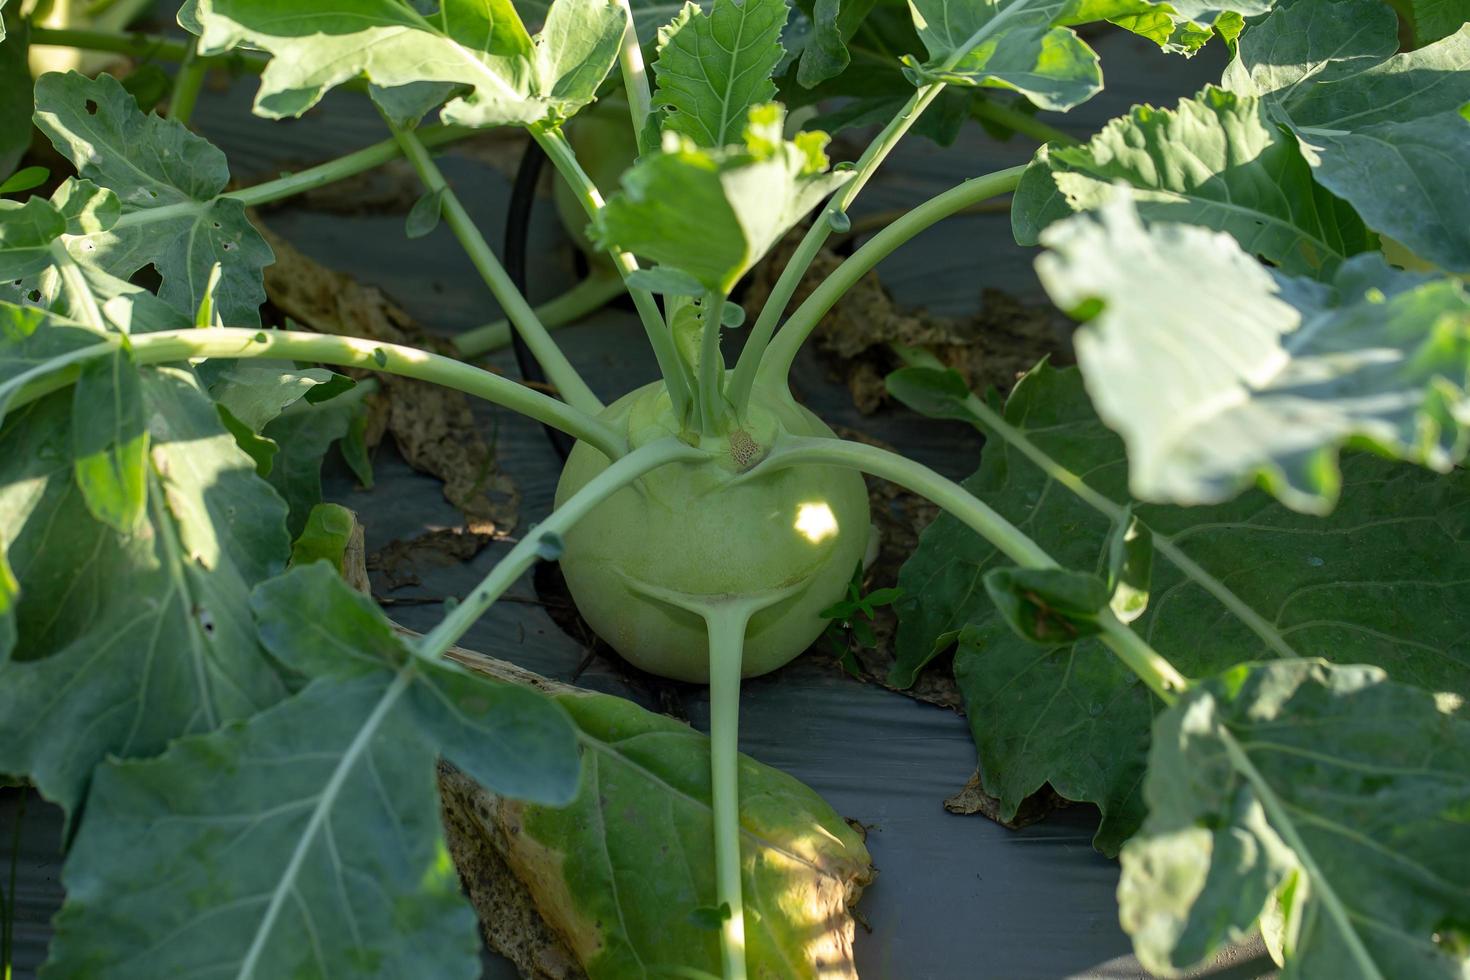 Kohlrabi cabbage or turnip plant growing in in the garden photo